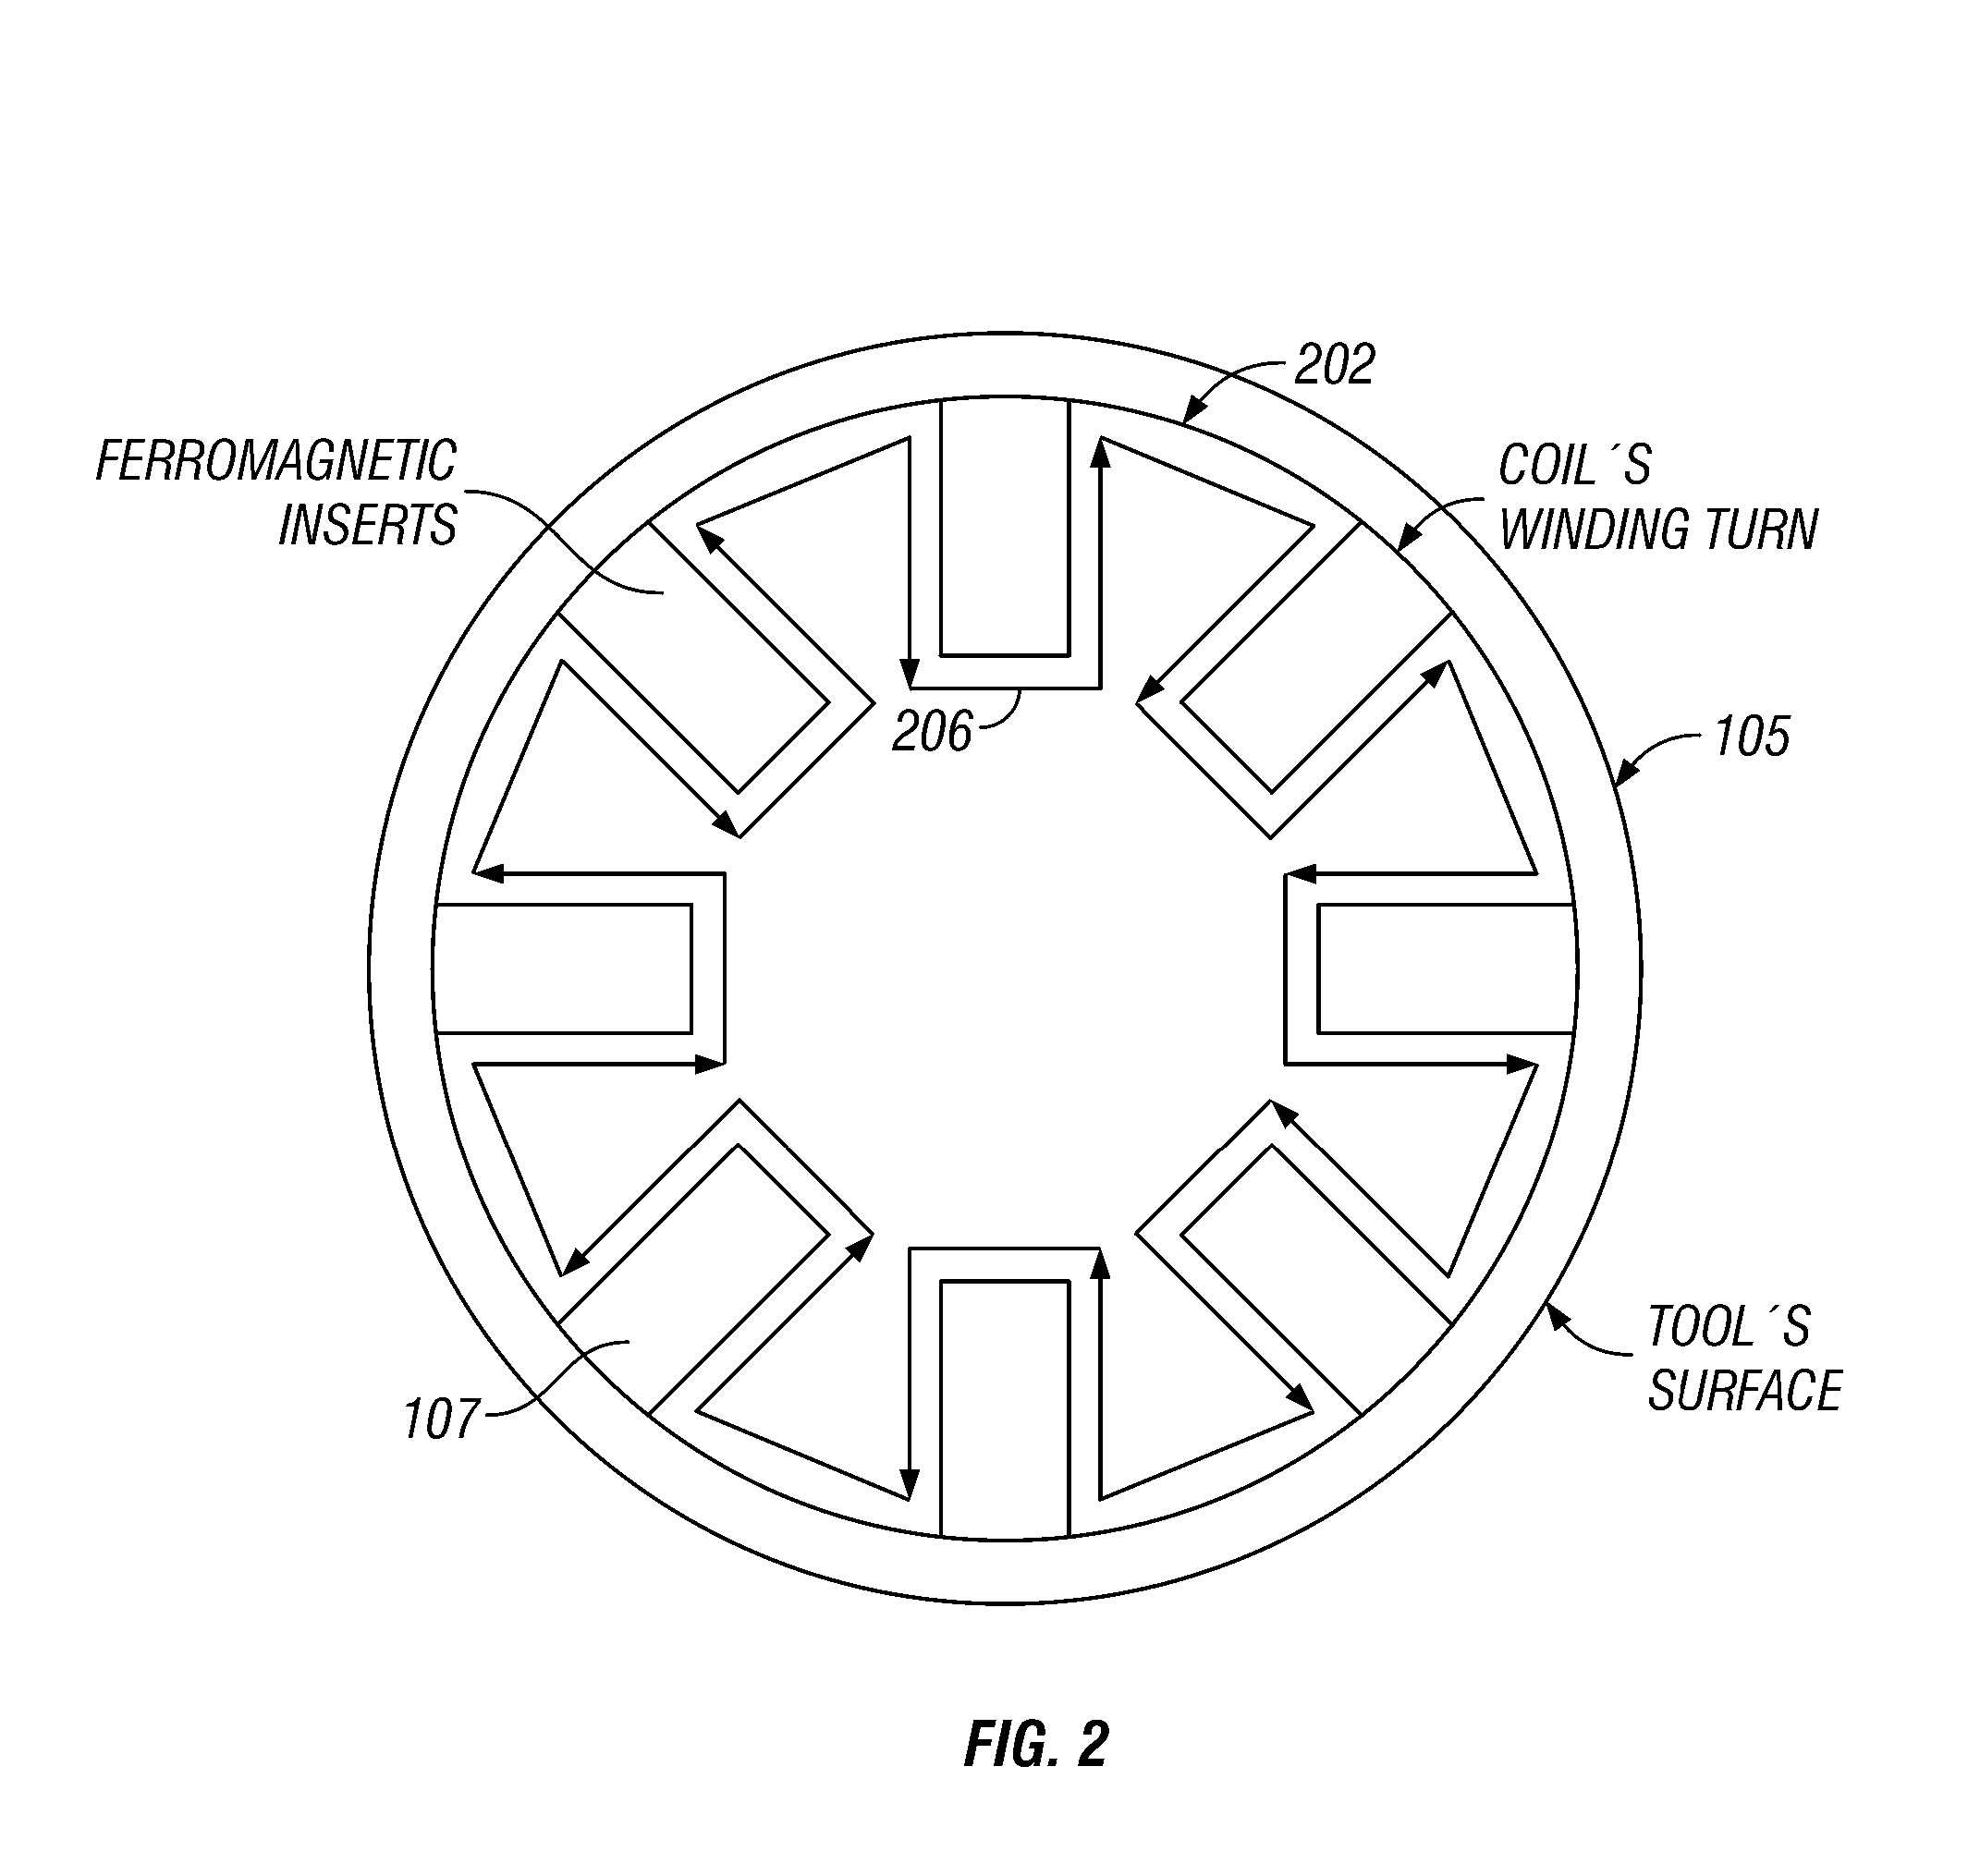 Method and apparatus for multi-component induction instrument measuring system for geosteering and formation resistivity data interpretation in horizontal, vertical and deviated wells